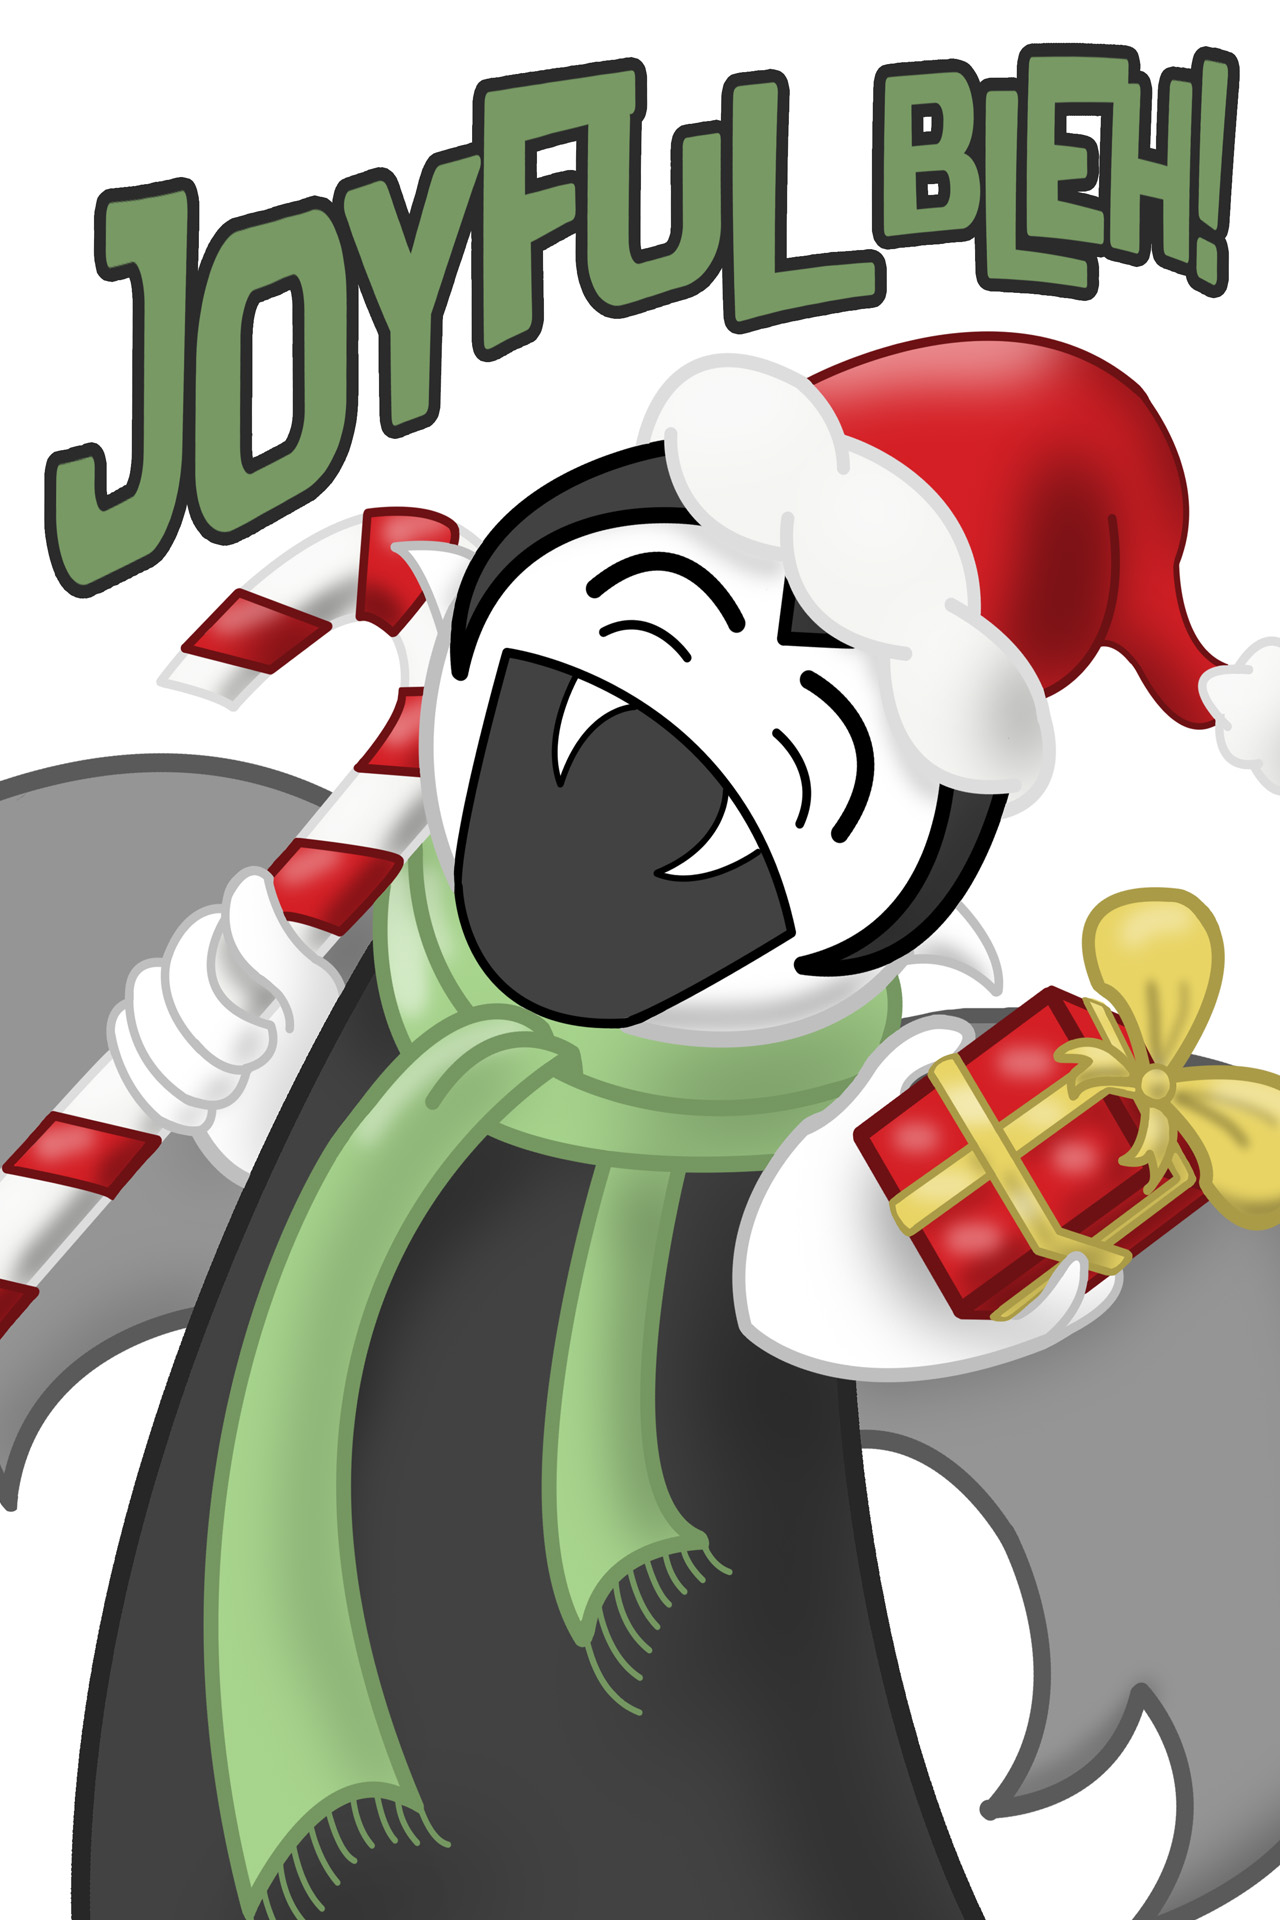 A Little Vampire exclaims “Joyful BLEH!” His is dressed in a red Santa hat and a green scarf, and holds a candy cane and a wrapped Christmas present.